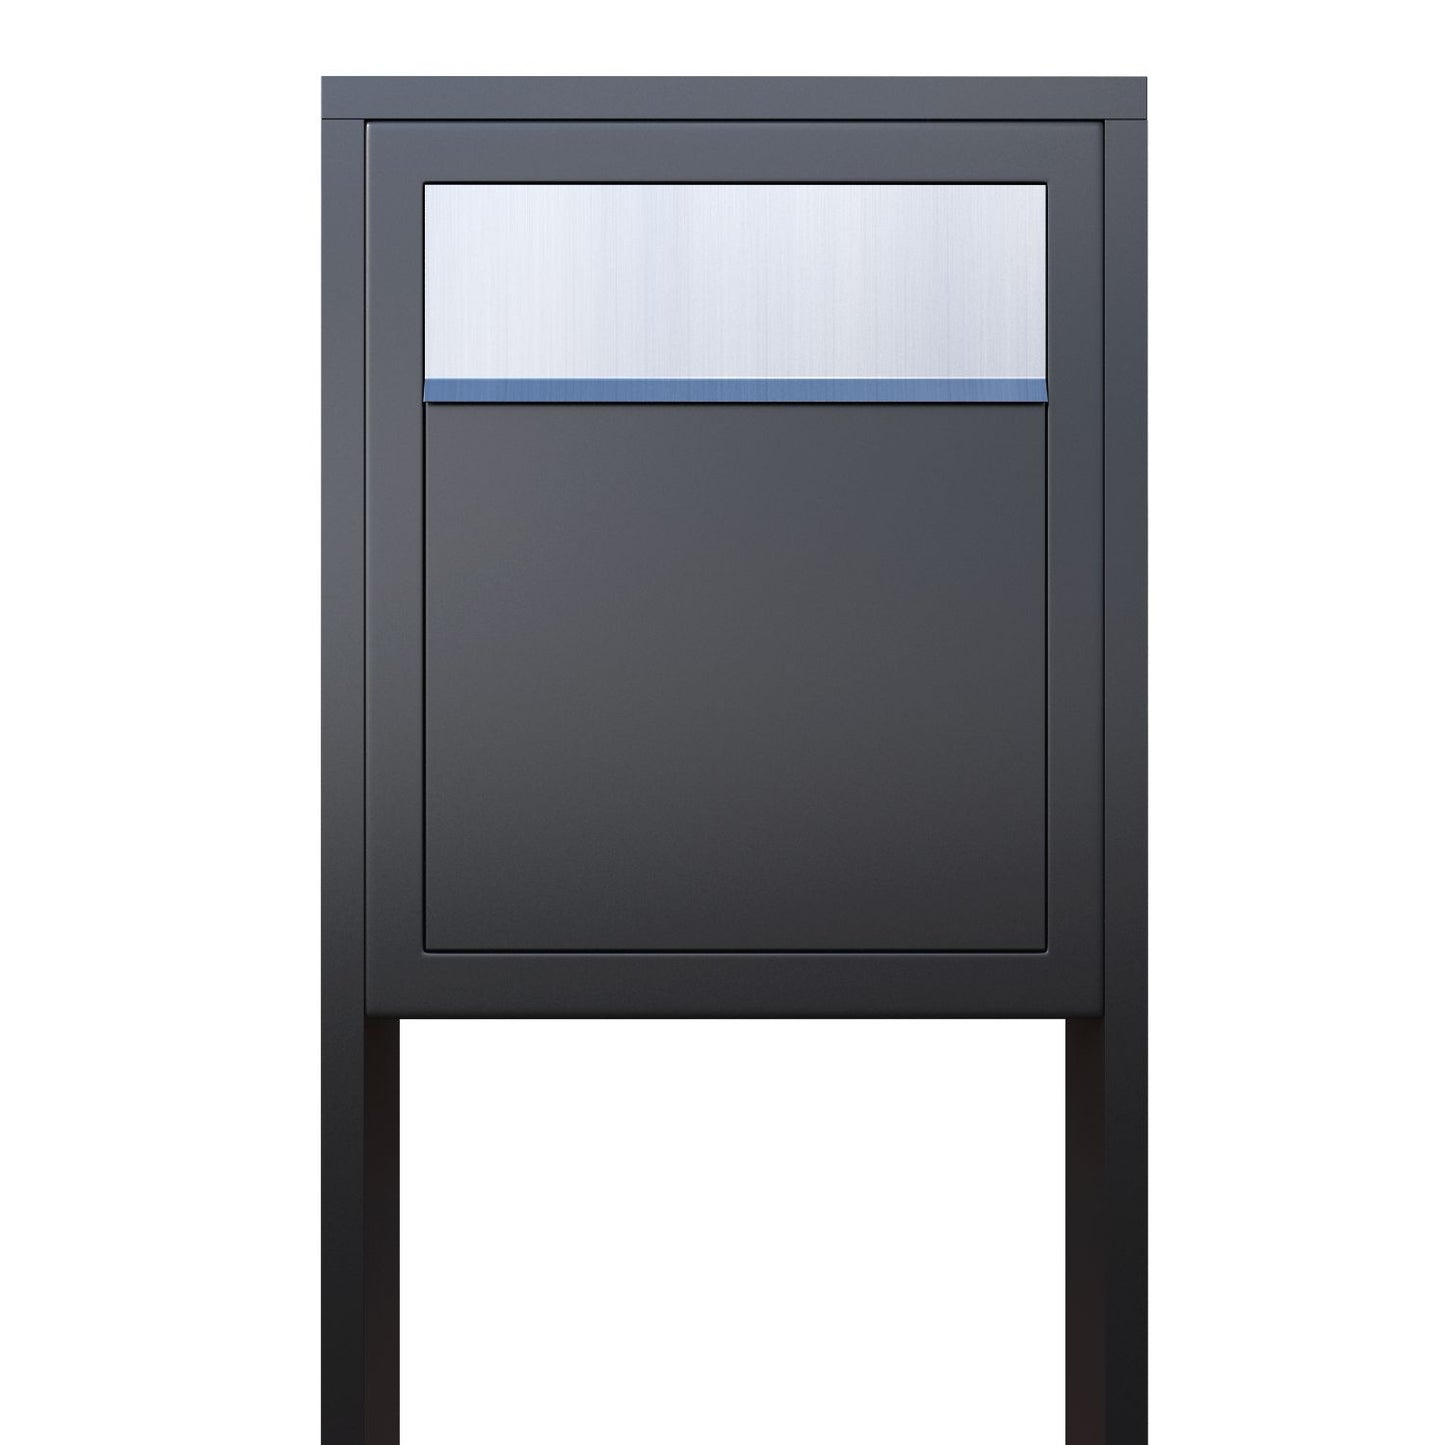 STAND BASE by Bravios - Modern post-mounted anthracite mailbox with stainless steel flap